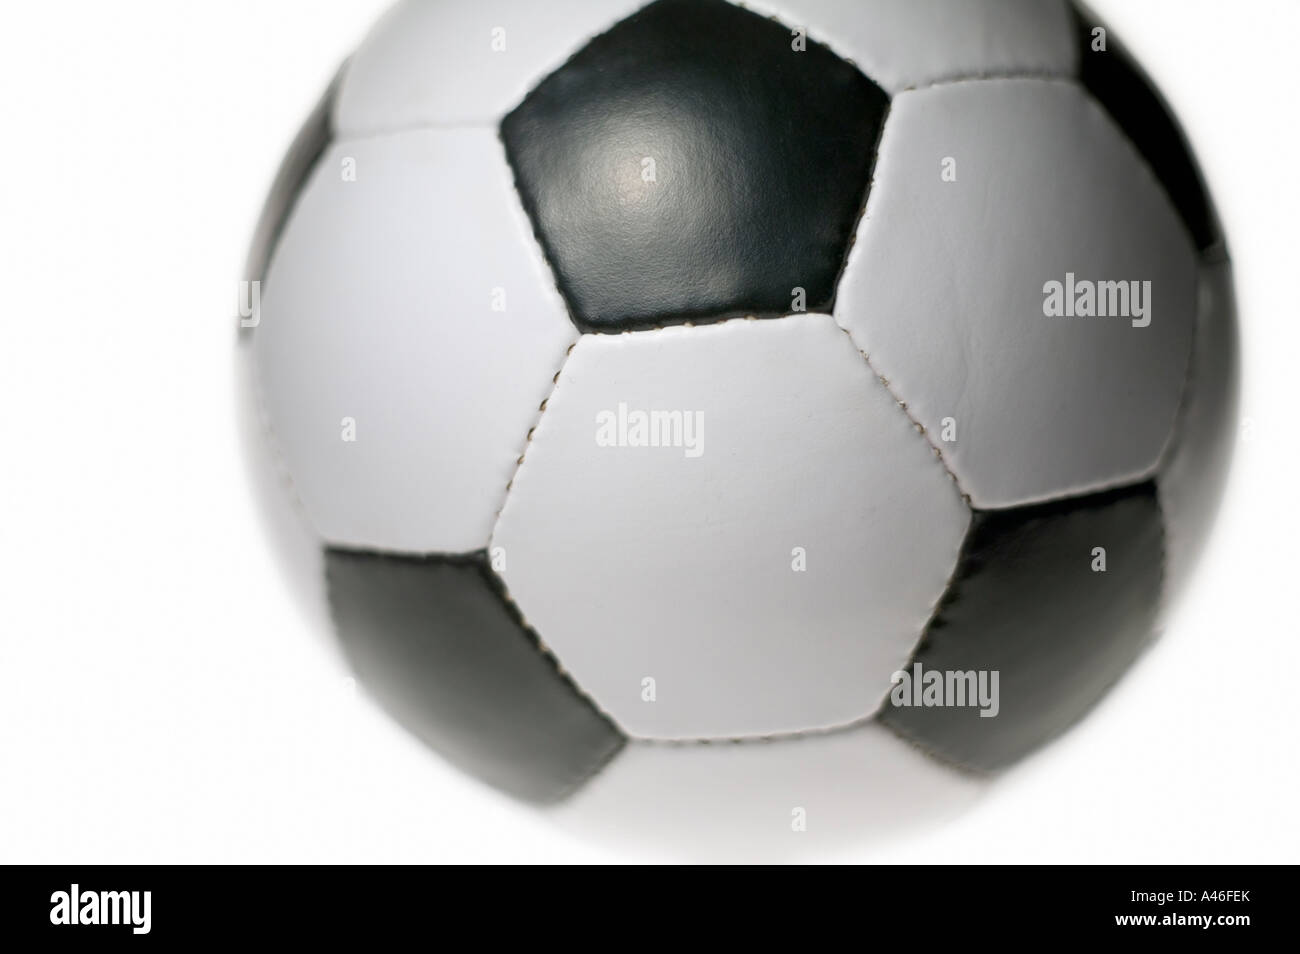 A soccer ball on white background Stock Photo